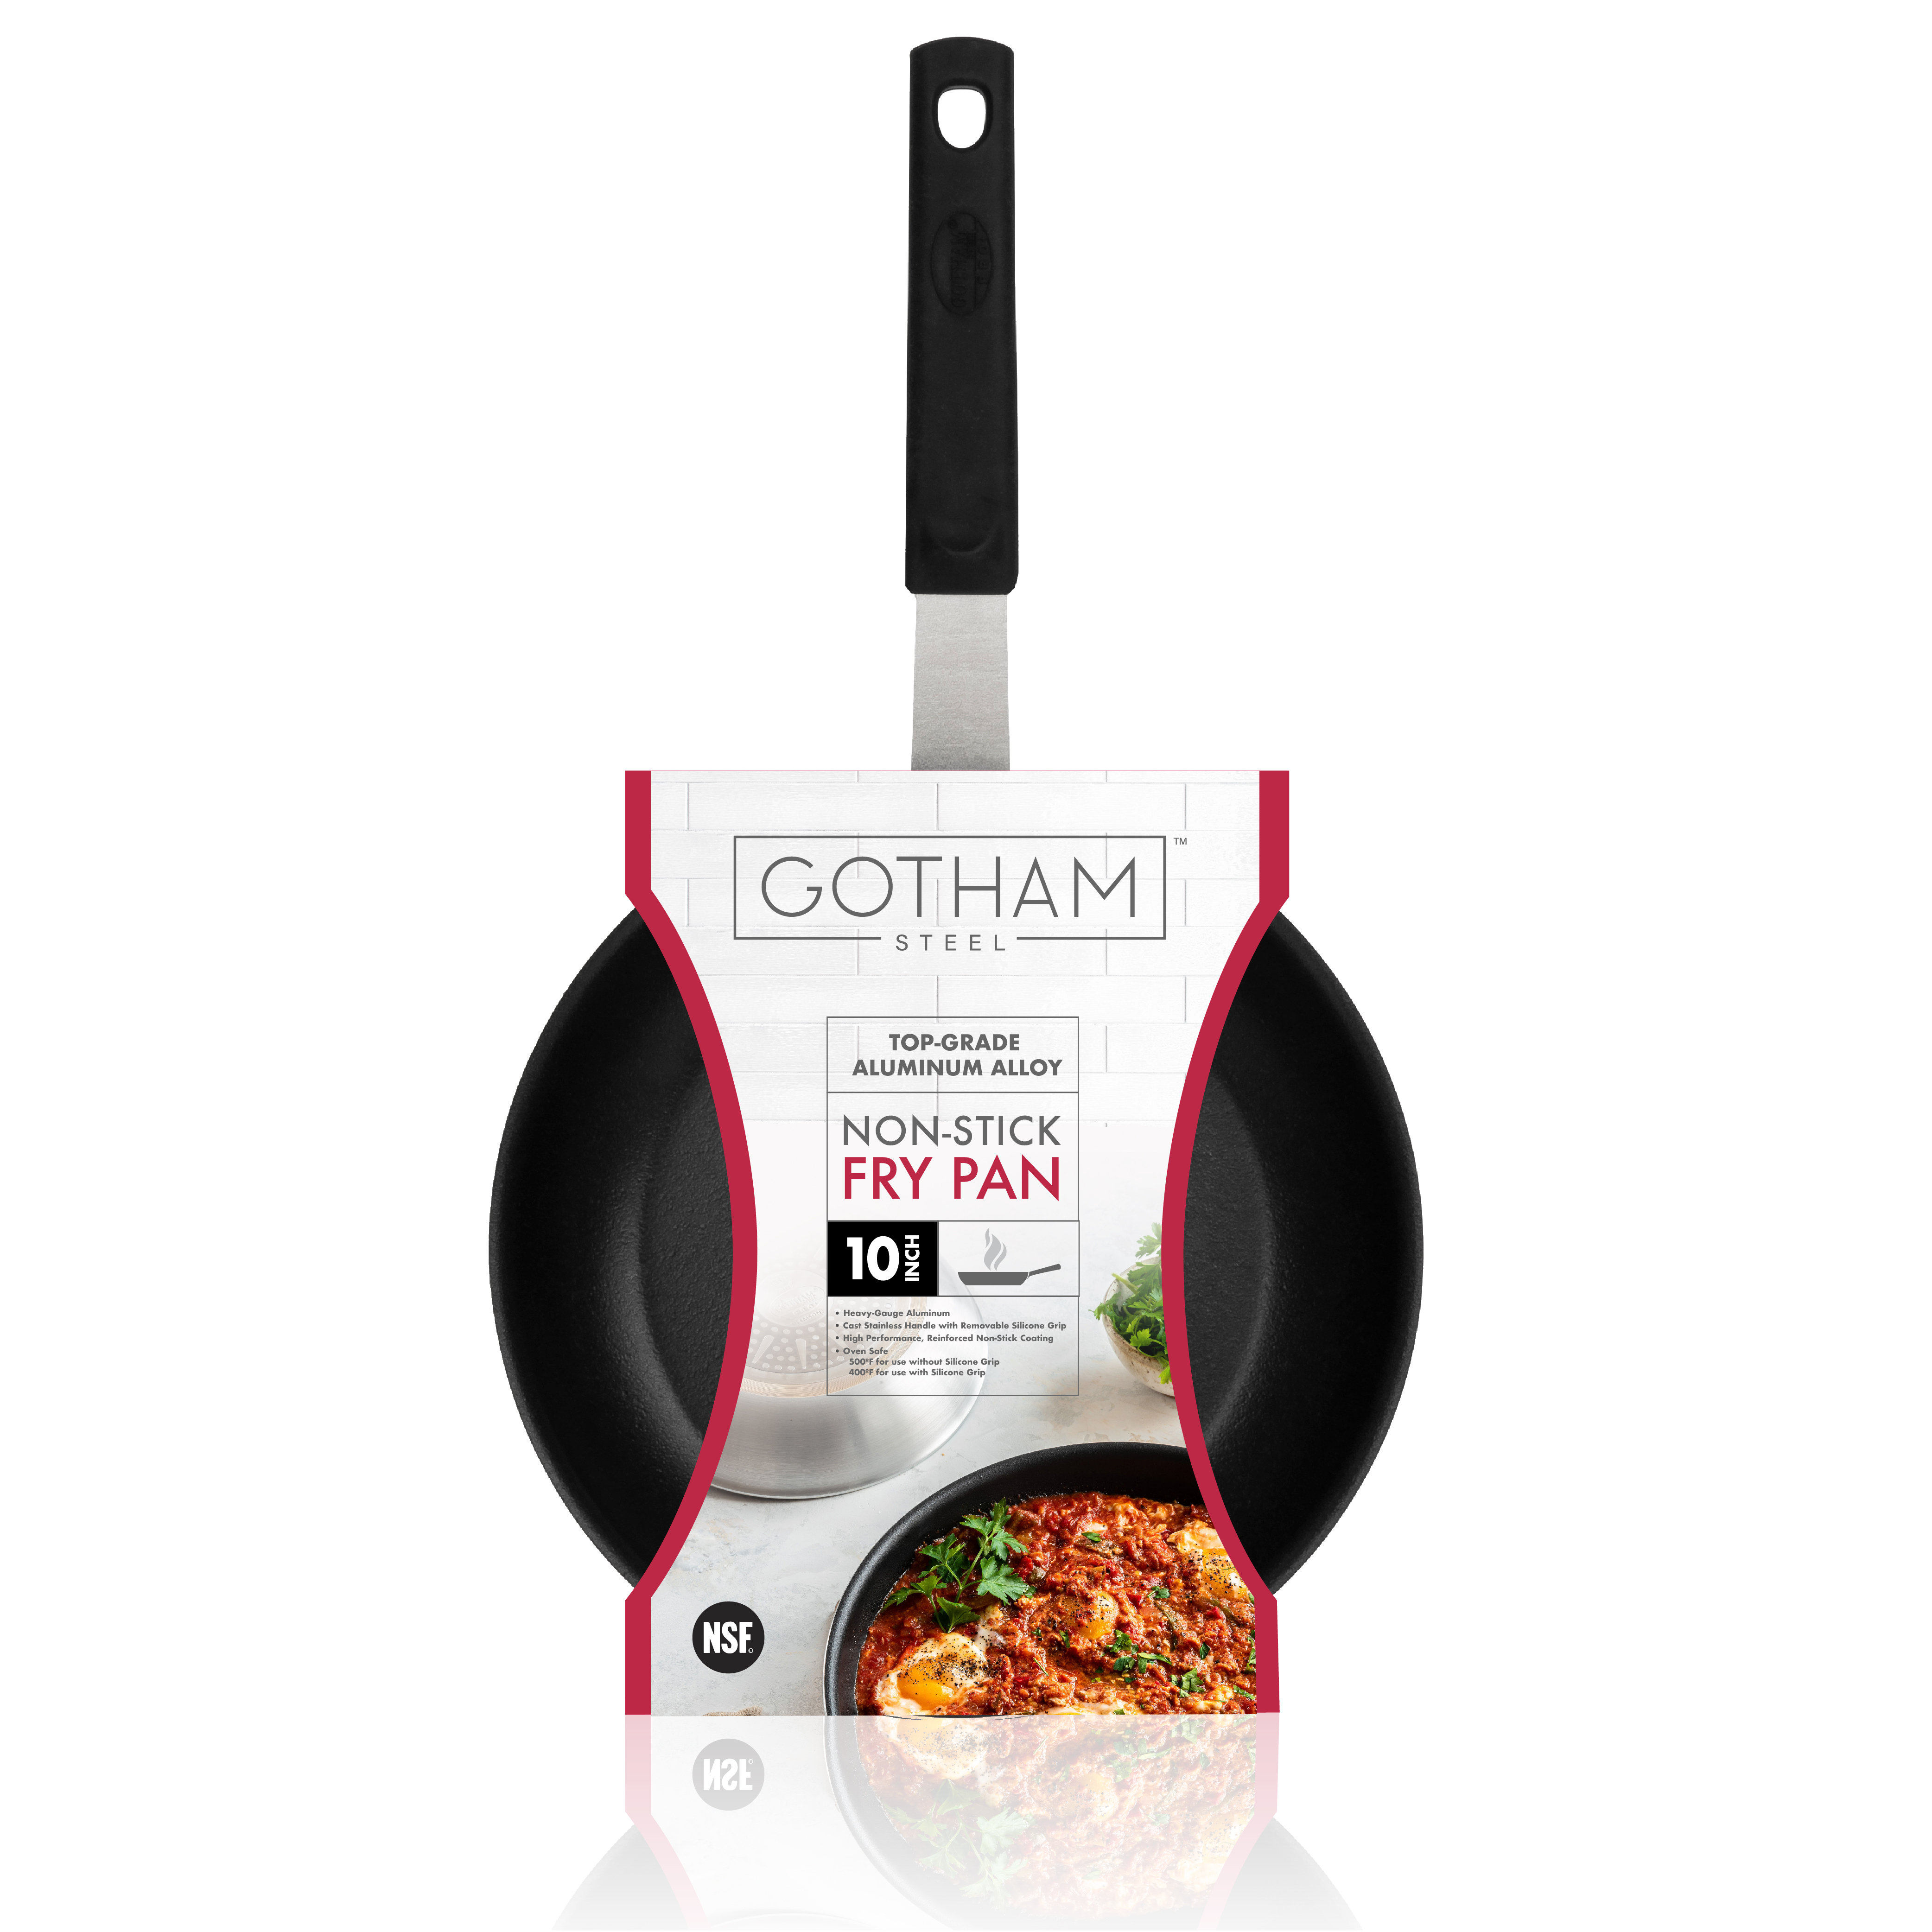 Gotham Steel Mother's Day Special TV Spot, 'Non-stick Cookware' 